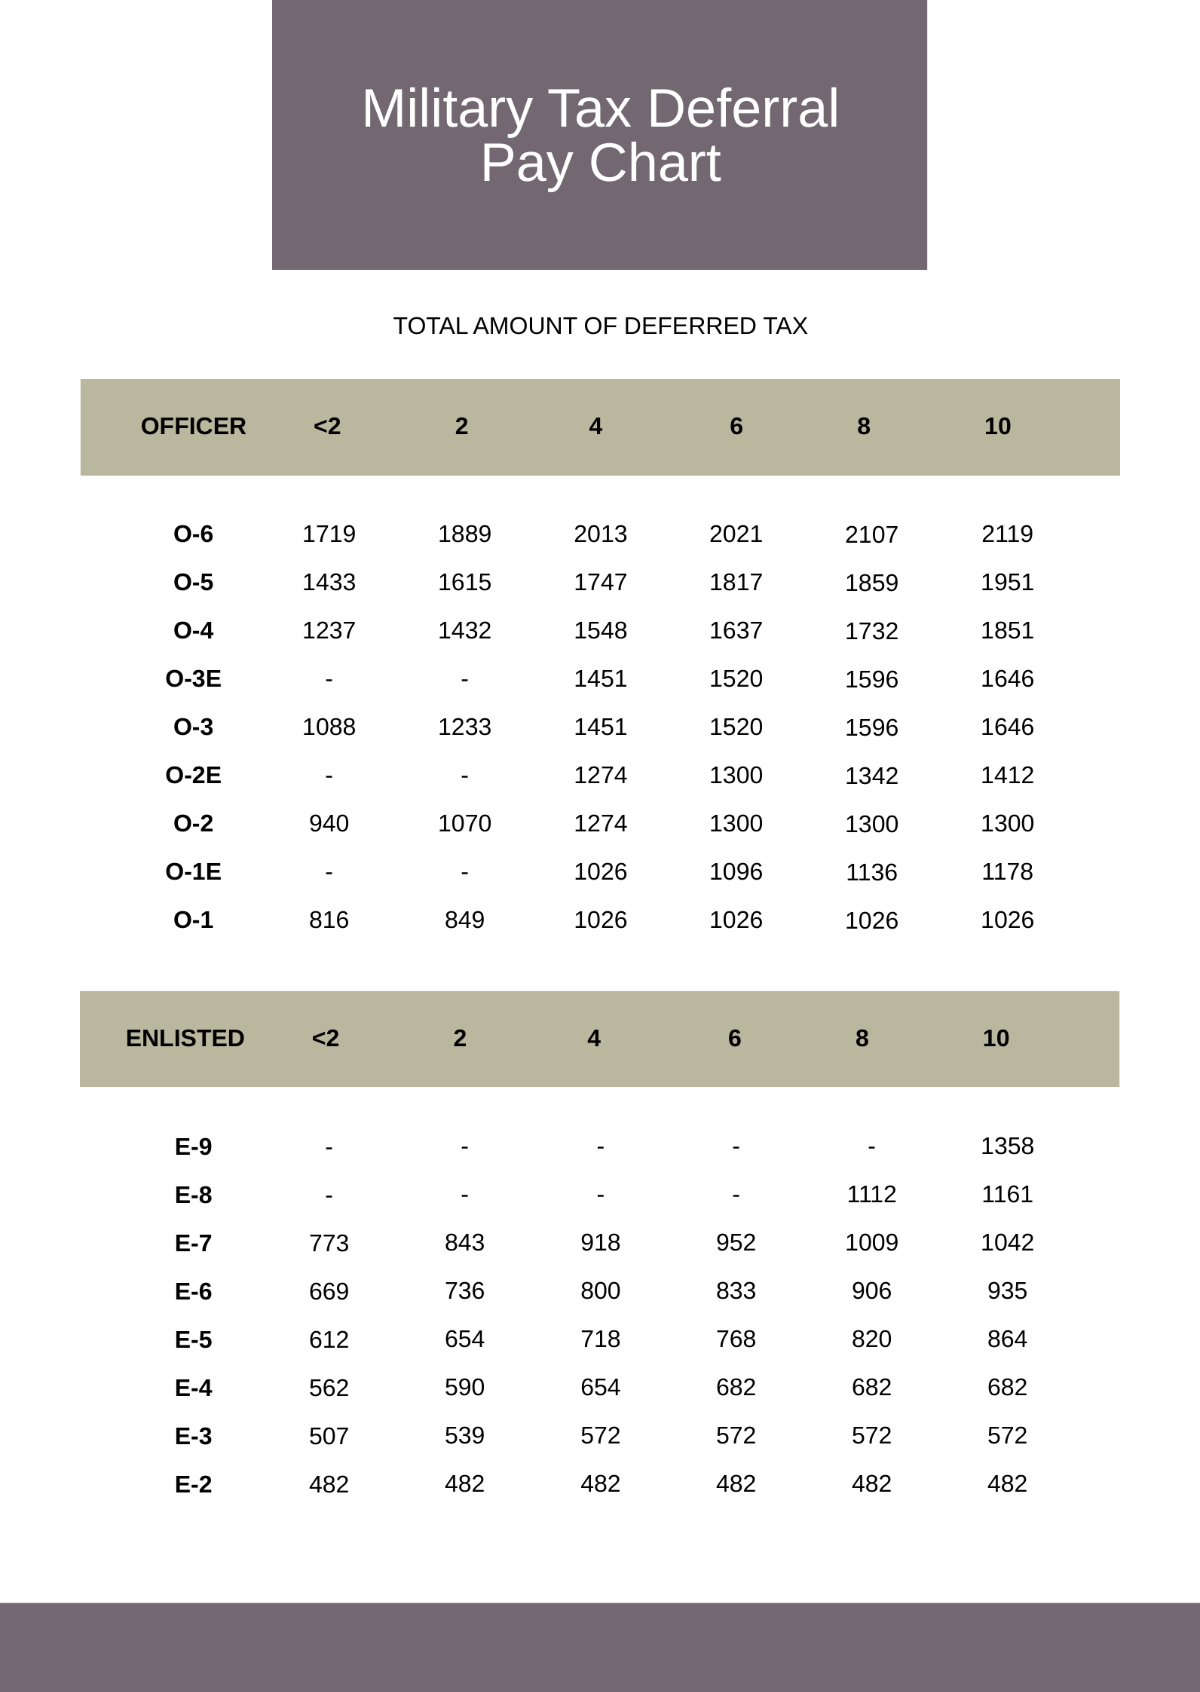 Military Tax Deferral Pay Chart